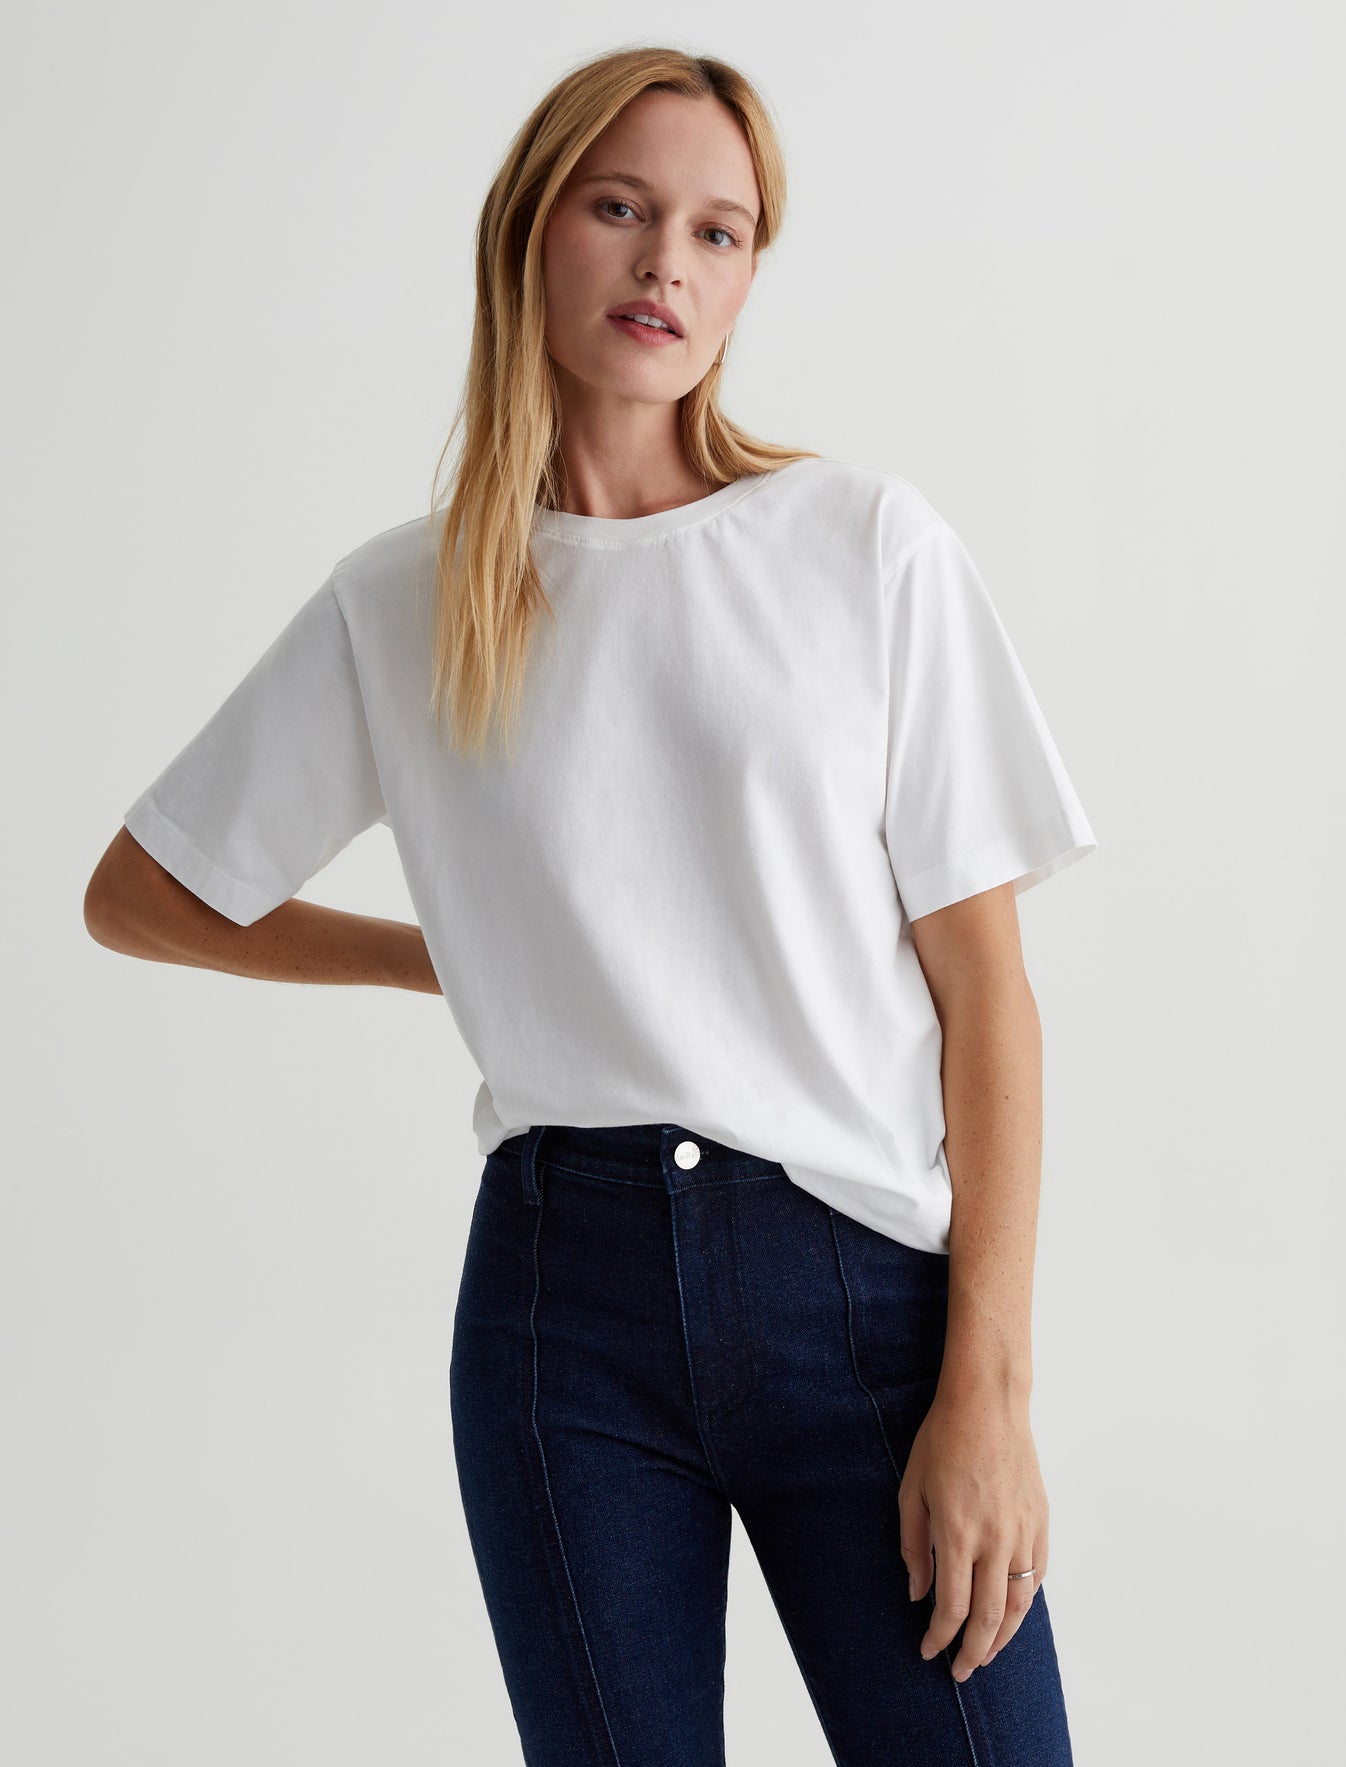 Albright Crew Ex-White Relaxed Fit Short Sleeve Crew Neck T-Shirt Women Top Photo 1